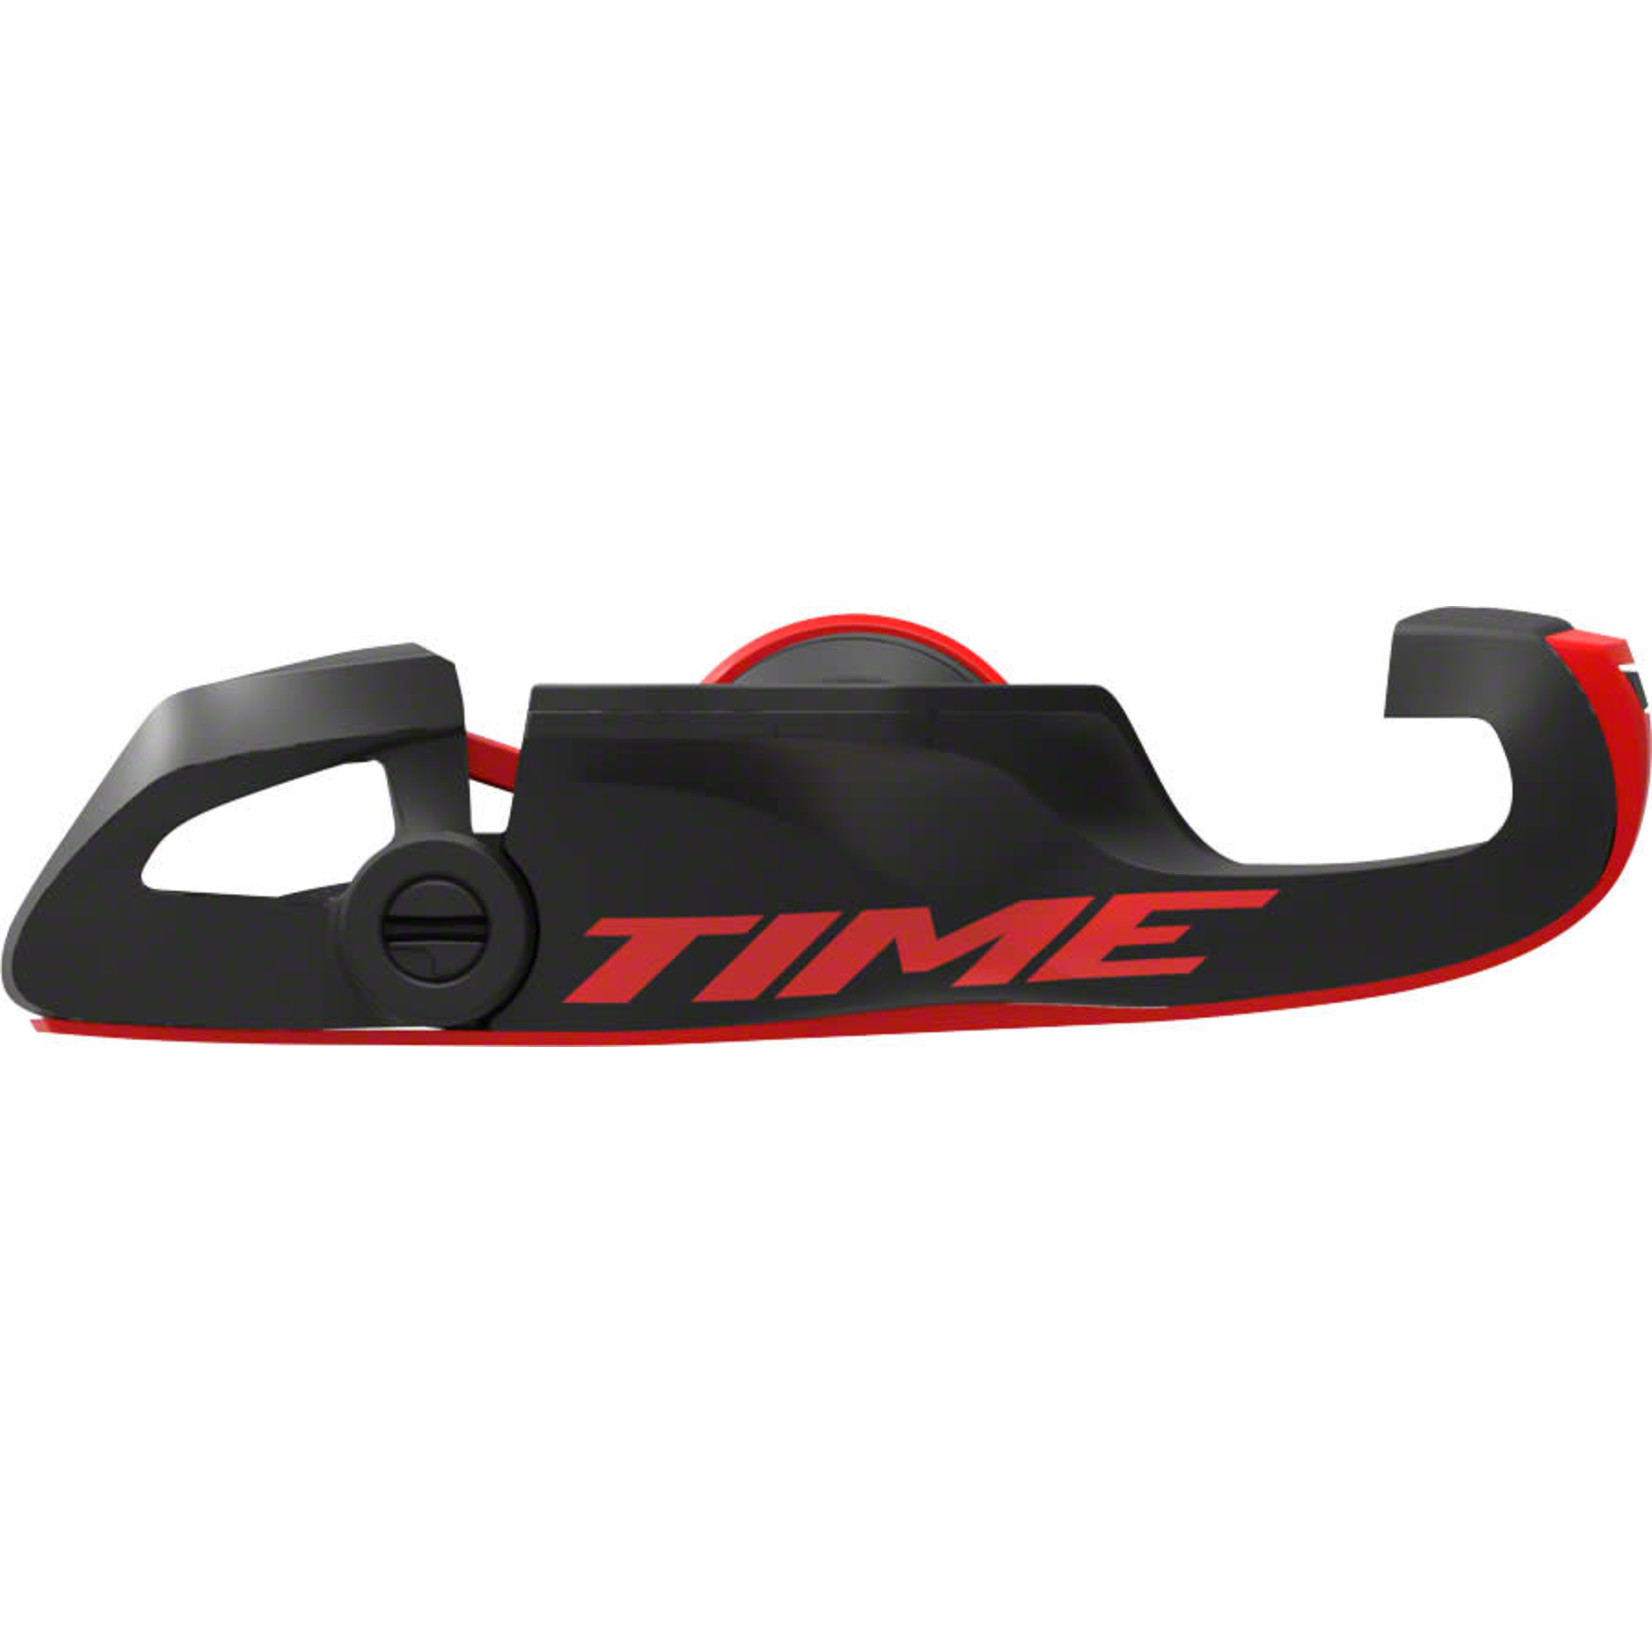 TIME XPro 12 road pedal Black/Red